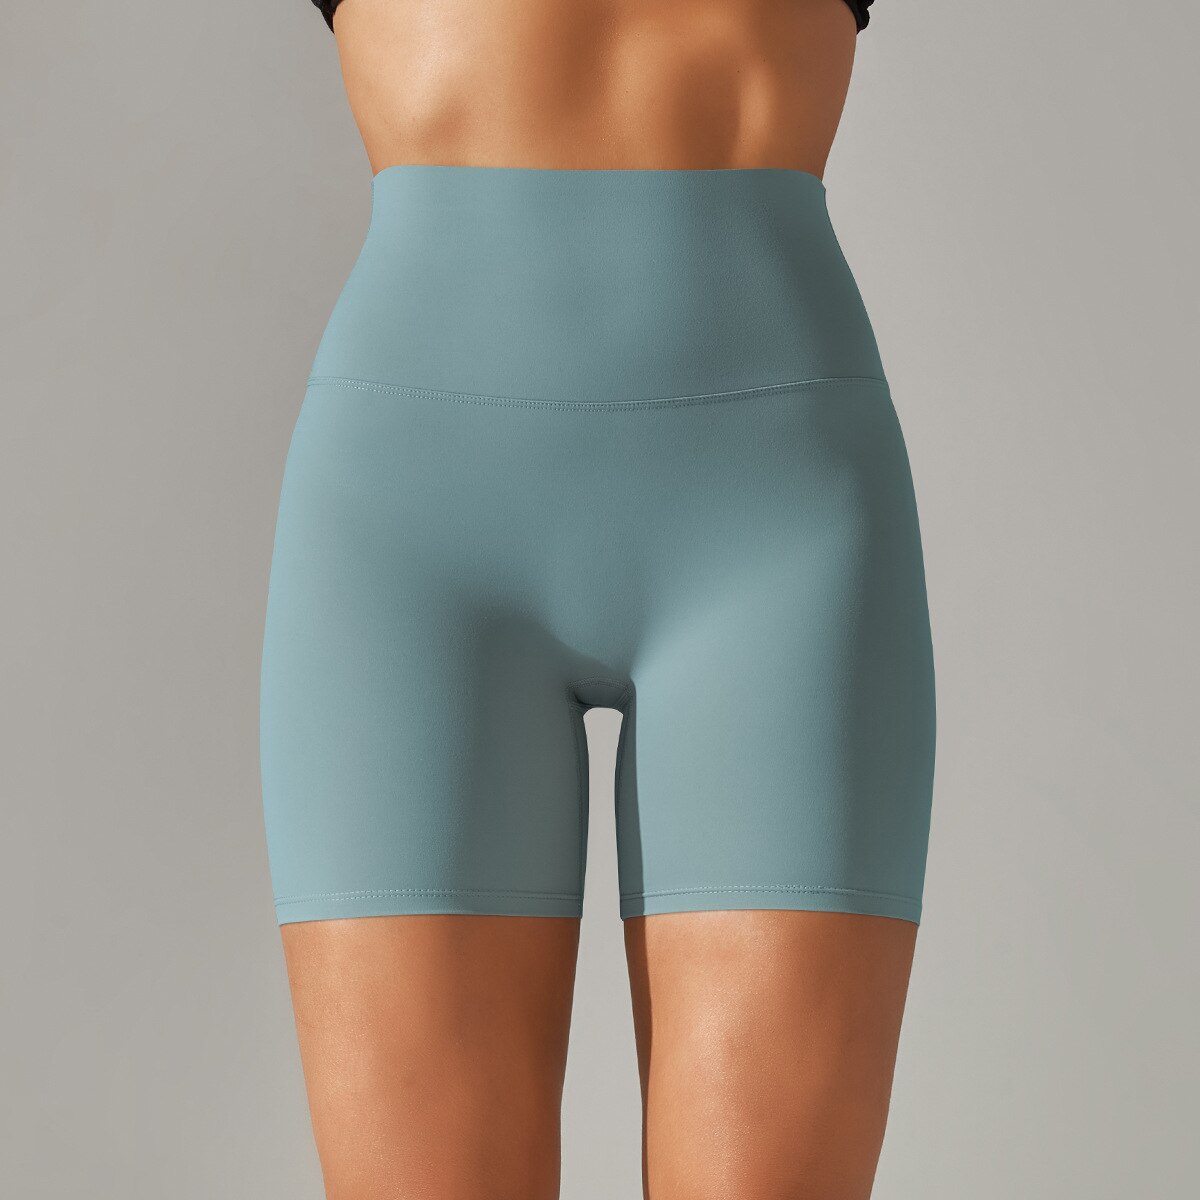 Summer Shorts Chic Gym Wear Mysterious Green XS